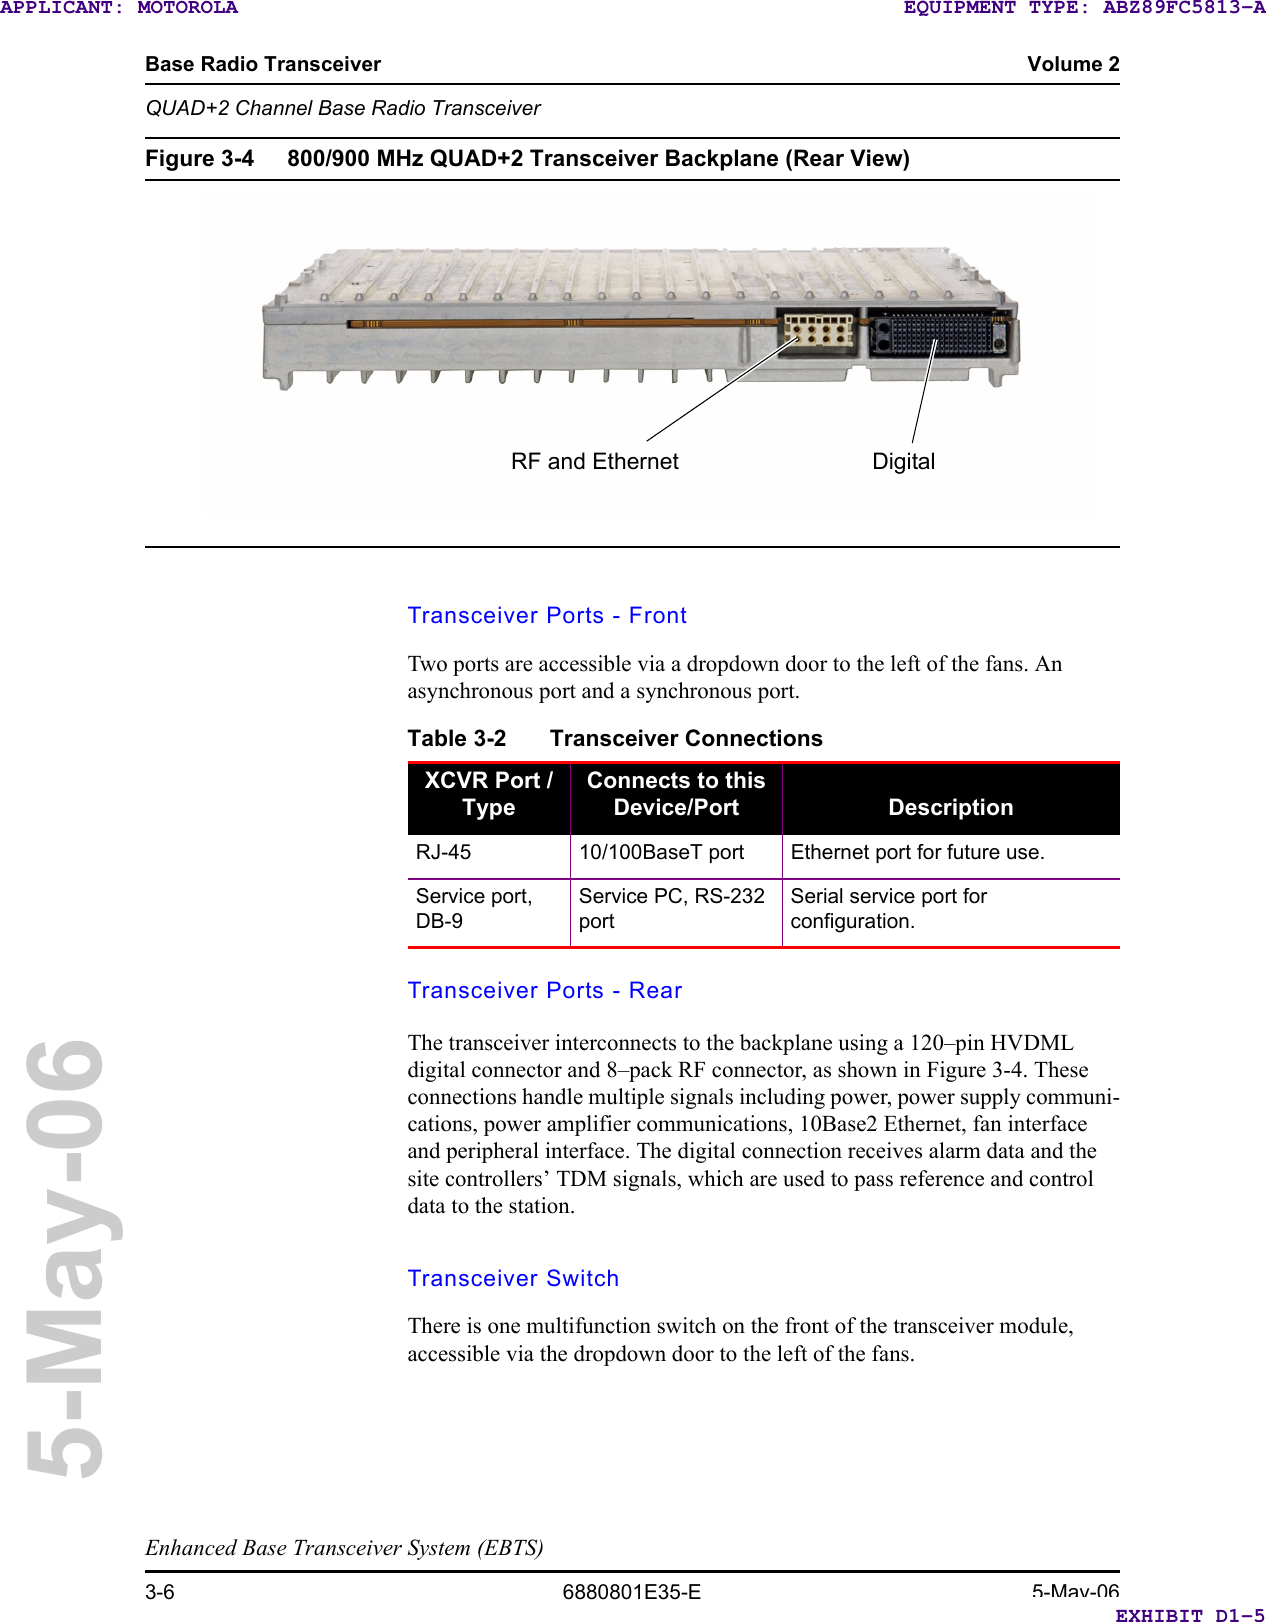 Base Radio Transceiver Volume 2QUAD+2 Channel Base Radio TransceiverEnhanced Base Transceiver System (EBTS)3-6 6880801E35-E 5-May-065-May-06Figure 3-4 800/900 MHz QUAD+2 Transceiver Backplane (Rear View) Transceiver Ports - FrontTwo ports are accessible via a dropdown door to the left of the fans. An asynchronous port and a synchronous port.Transceiver Ports - RearThe transceiver interconnects to the backplane using a 120–pin HVDML digital connector and 8–pack RF connector, as shown in Figure 3-4. These connections handle multiple signals including power, power supply communi-cations, power amplifier communications, 10Base2 Ethernet, fan interface and peripheral interface. The digital connection receives alarm data and the site controllers’ TDM signals, which are used to pass reference and control data to the station.Transceiver SwitchThere is one multifunction switch on the front of the transceiver module, accessible via the dropdown door to the left of the fans.RF and Ethernet DigitalTable 3-2 Transceiver ConnectionsXCVR Port / TypeConnects to this Device/Port DescriptionRJ-45 10/100BaseT port Ethernet port for future use.Service port, DB-9Service PC, RS-232 portSerial service port for configuration.EXHIBIT D1-5EQUIPMENT TYPE: ABZ89FC5813-AAPPLICANT: MOTOROLA